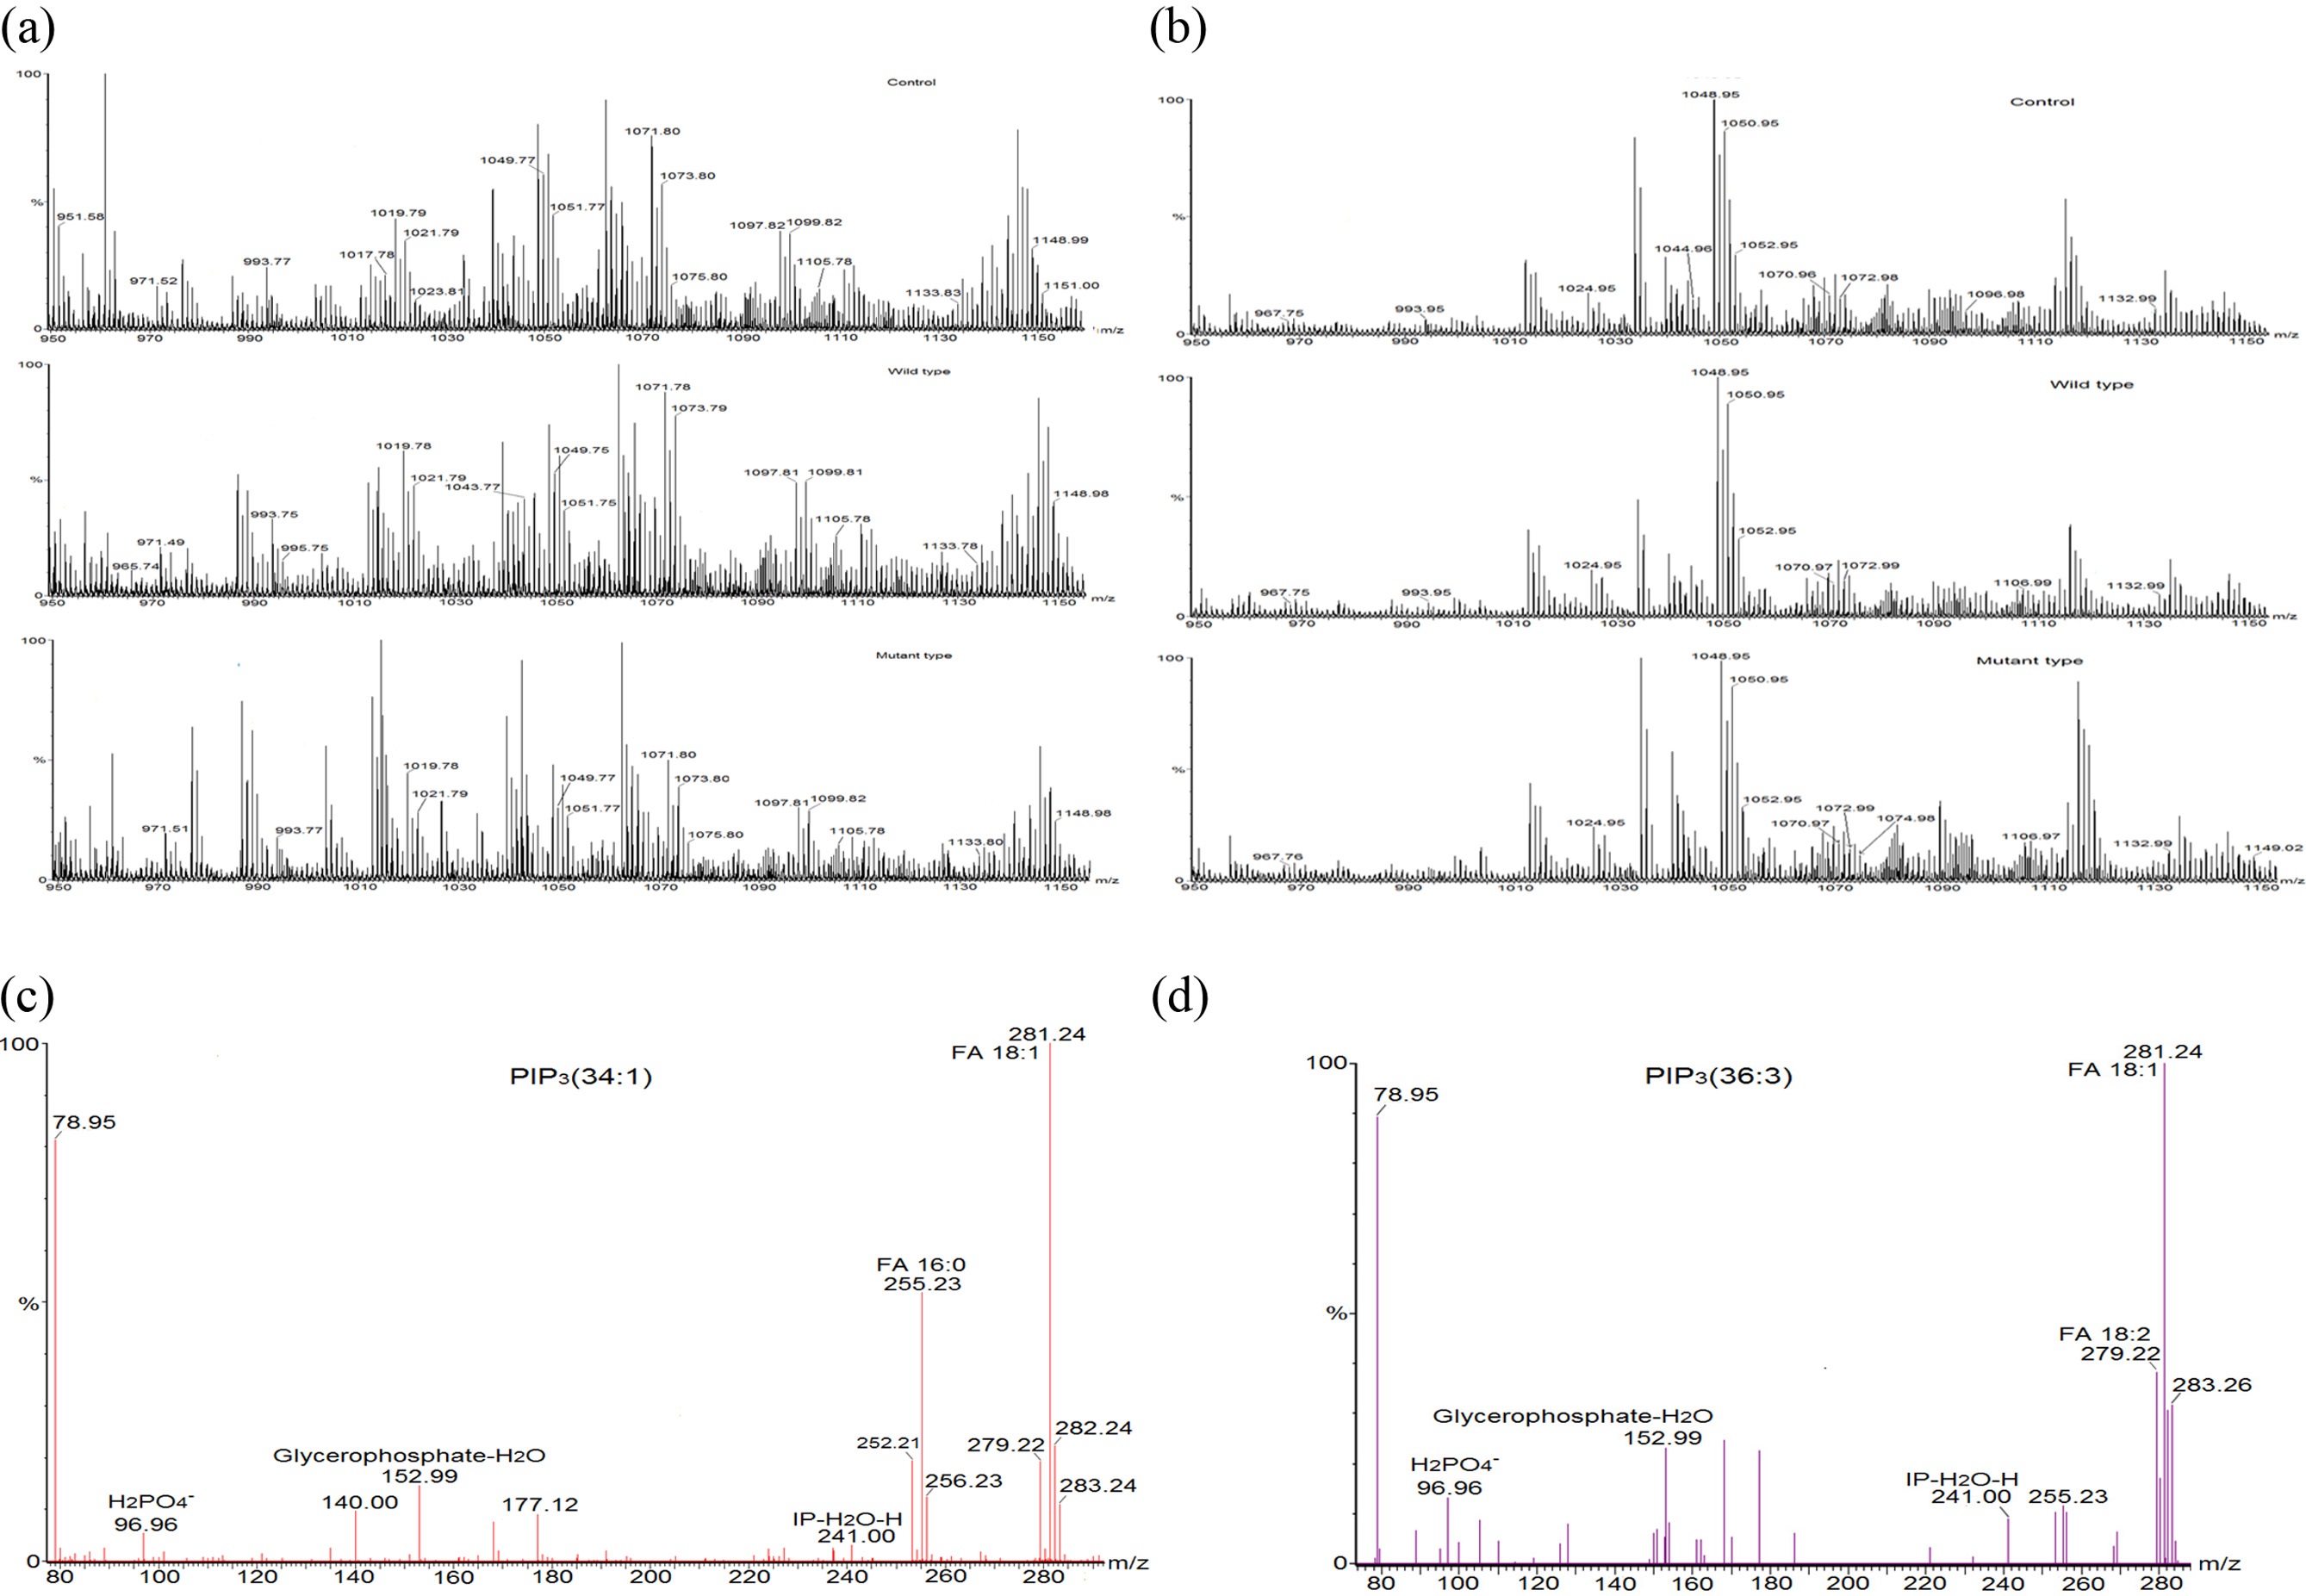 Representative mass spectrum (a, b) and MS/MS analysis (c, d) of phosphoinositides extracted from (a) HeLa cell line and (b) HEK 293-T cell line. (c) PIP3 (34:1) was identified at m/z 1075.80 and (d) PIP3 (36:3) was identified at m/z 1099.81.